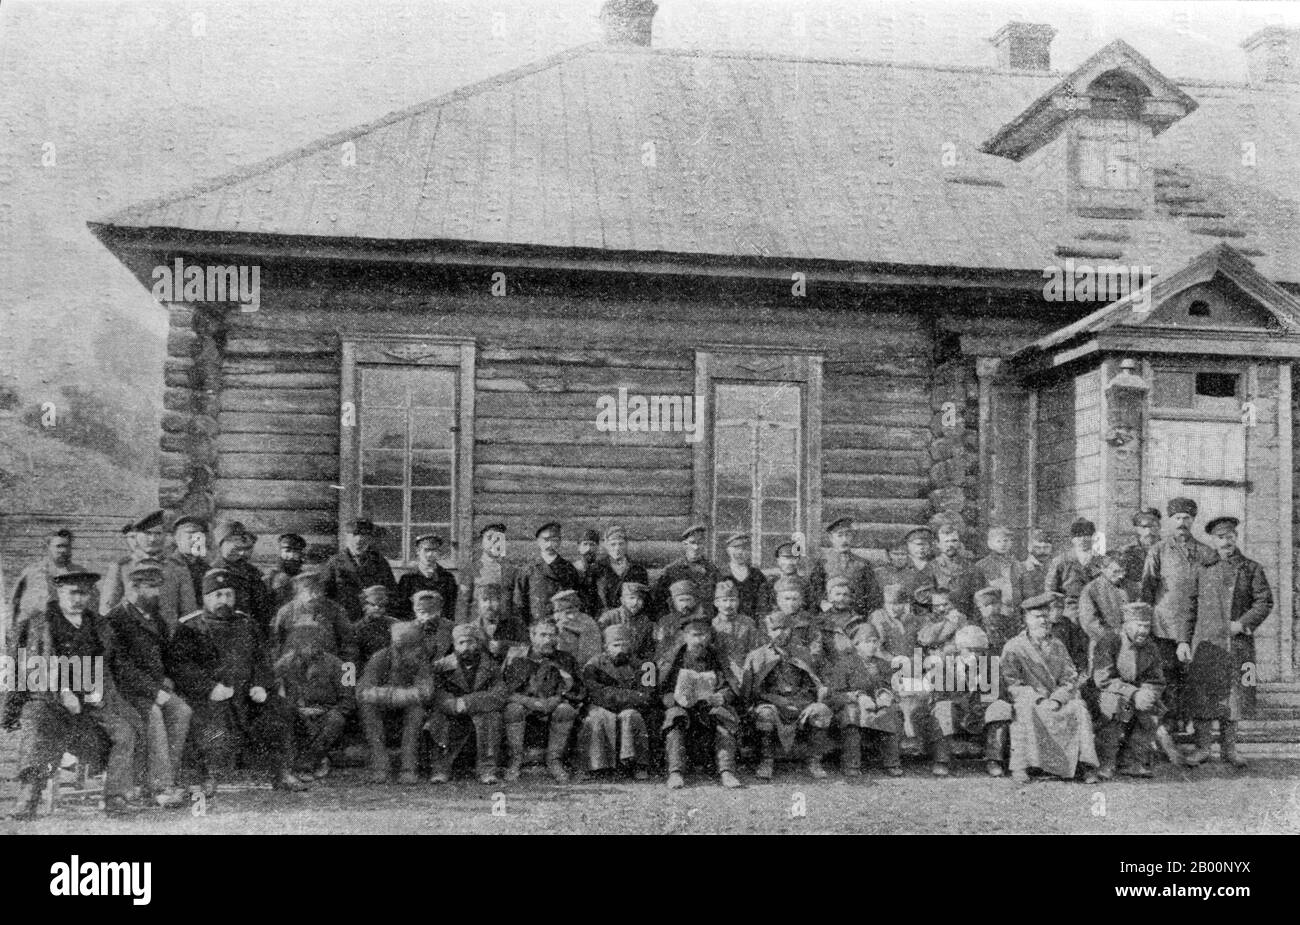 Russia: Russian settlers in Sakhalin. Vlas Mikhailovich Doroshevich, 1905.  Sakhalin, also Saghalien, is a large island in the North Pacific, which is officially part of Russia, administered as part of Sakhalin Oblast. The indigenous peoples of the island are the Sakhalin Ainu, Oroks and Nivkhs. Most Ainu relocated to Hokkaidō when the Japanese were displaced from the island in 1949. Sakhalin was claimed by both Russia and Japan in the course of the 19th and 20th centuries, which led to bitter disputes between the two countries over control of the island. Stock Photo